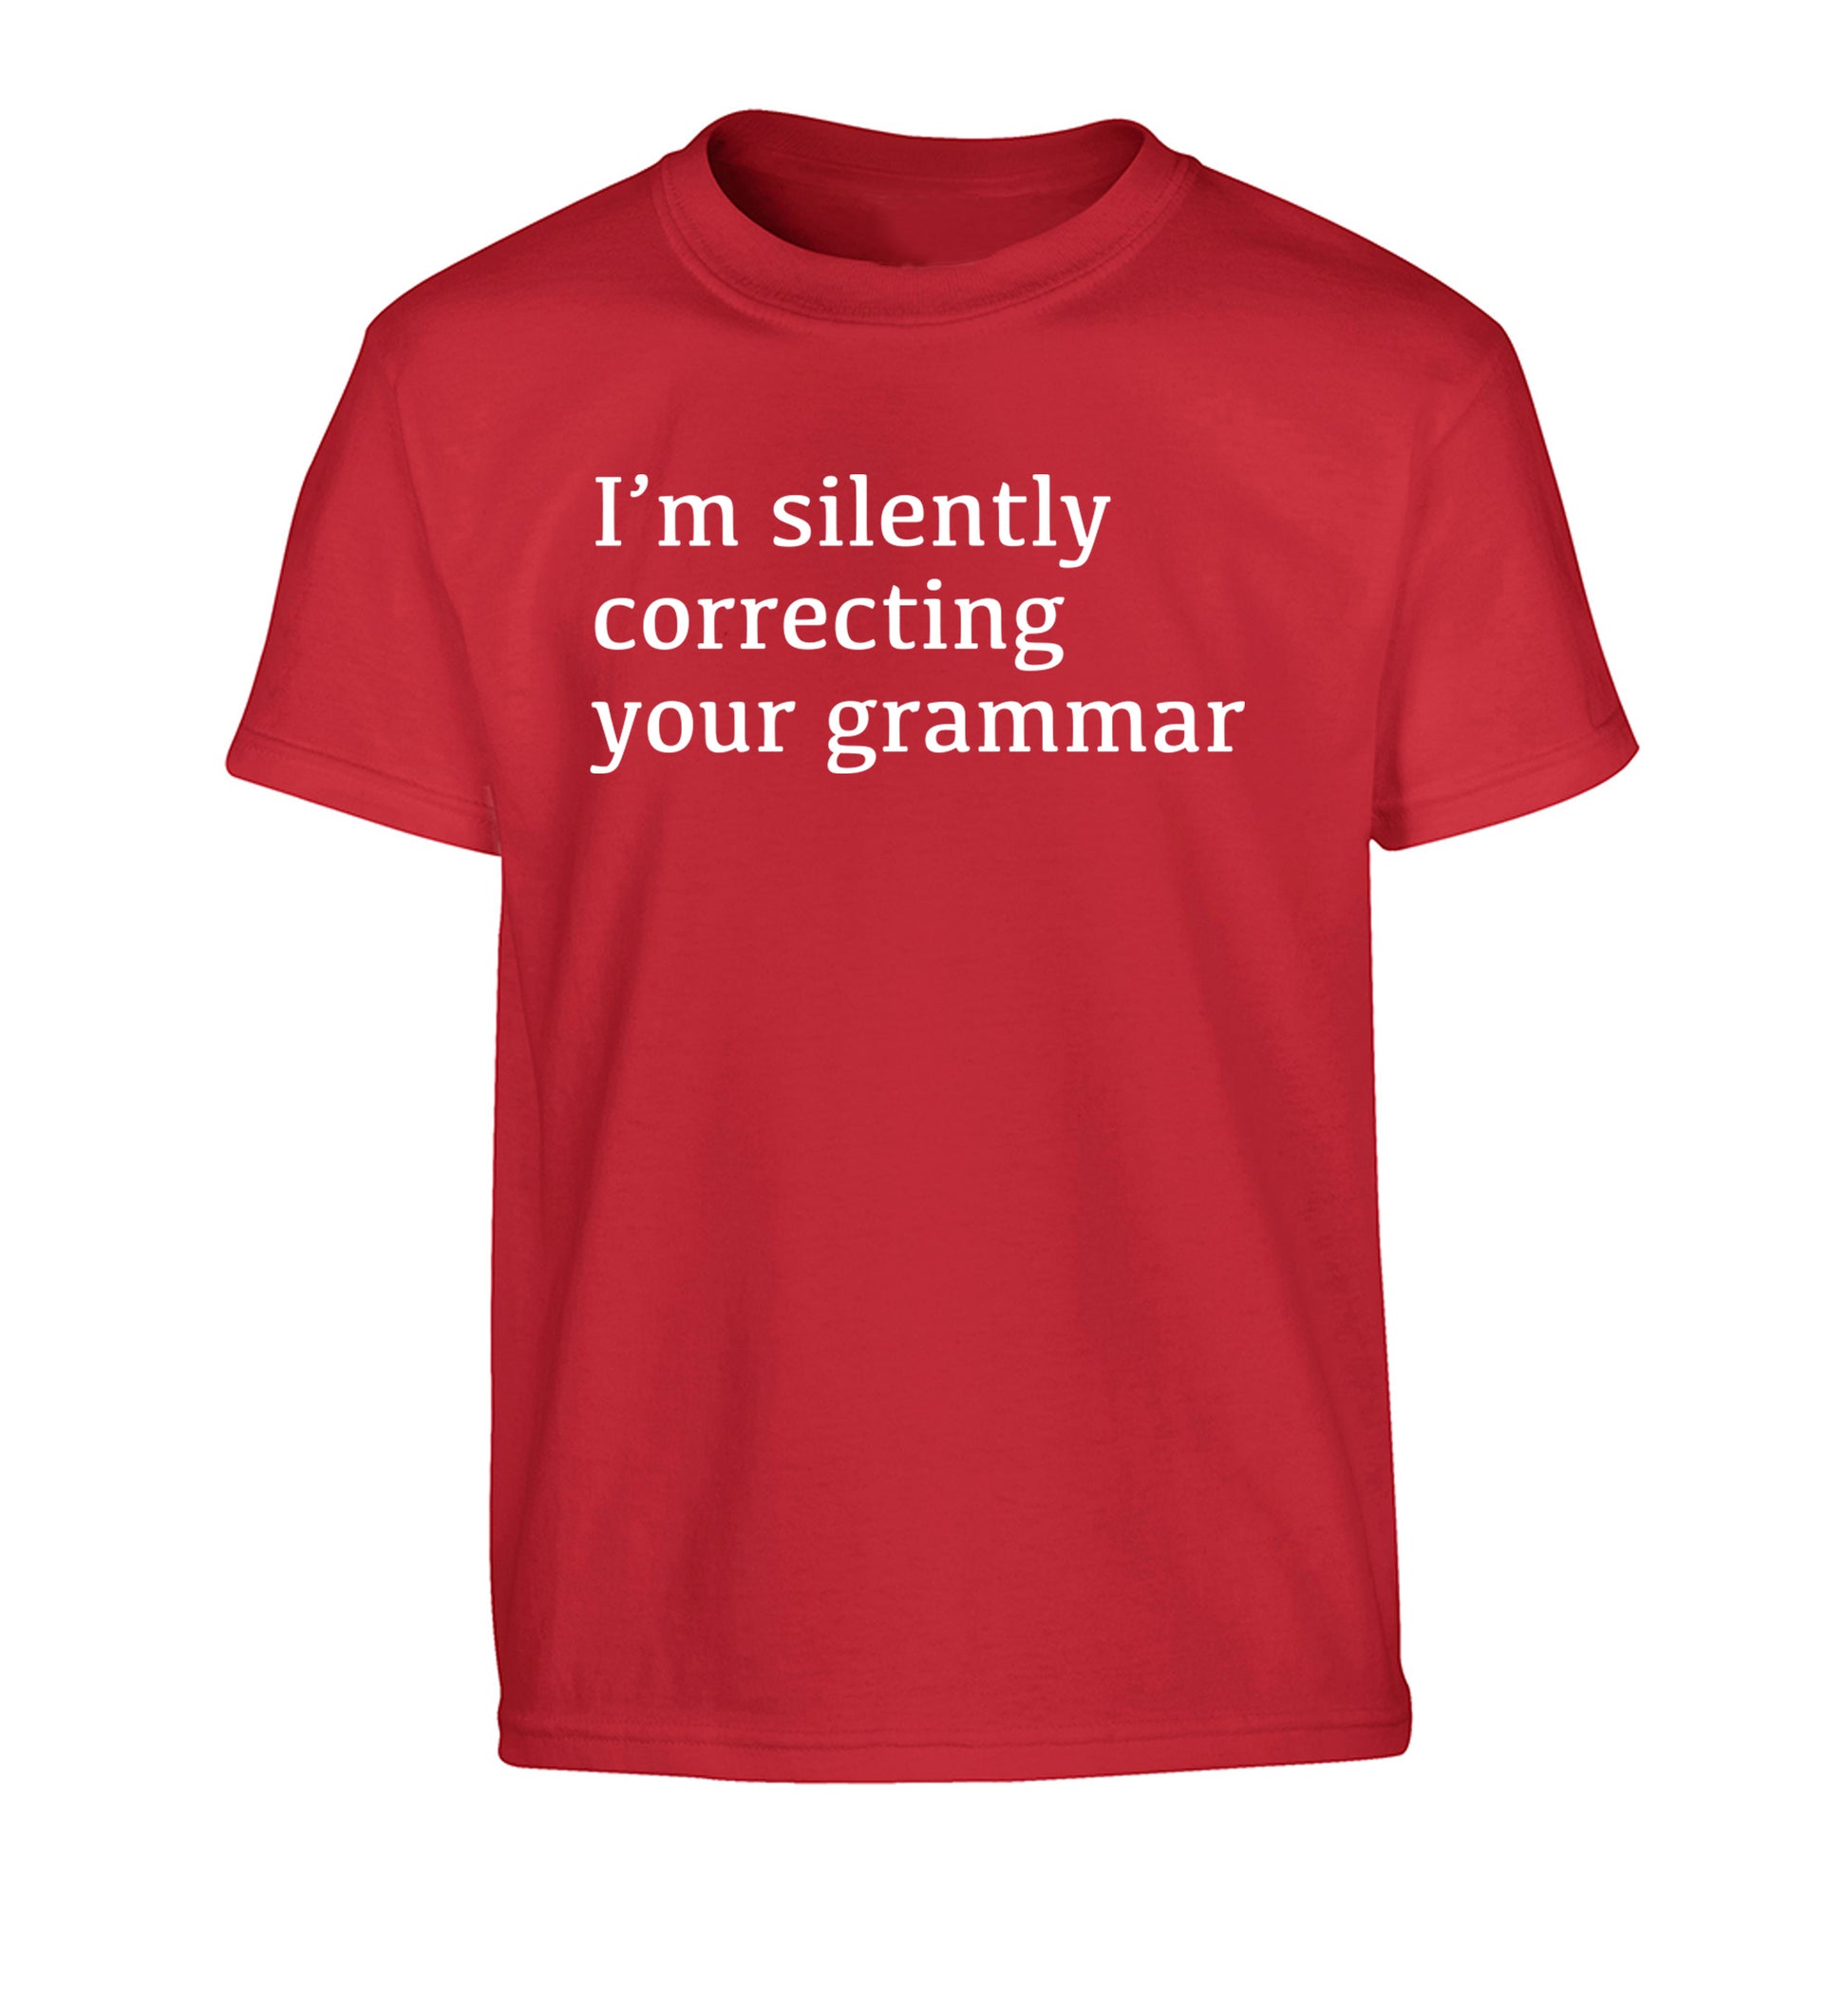 I'm silently correcting your grammar  Children's red Tshirt 12-14 Years